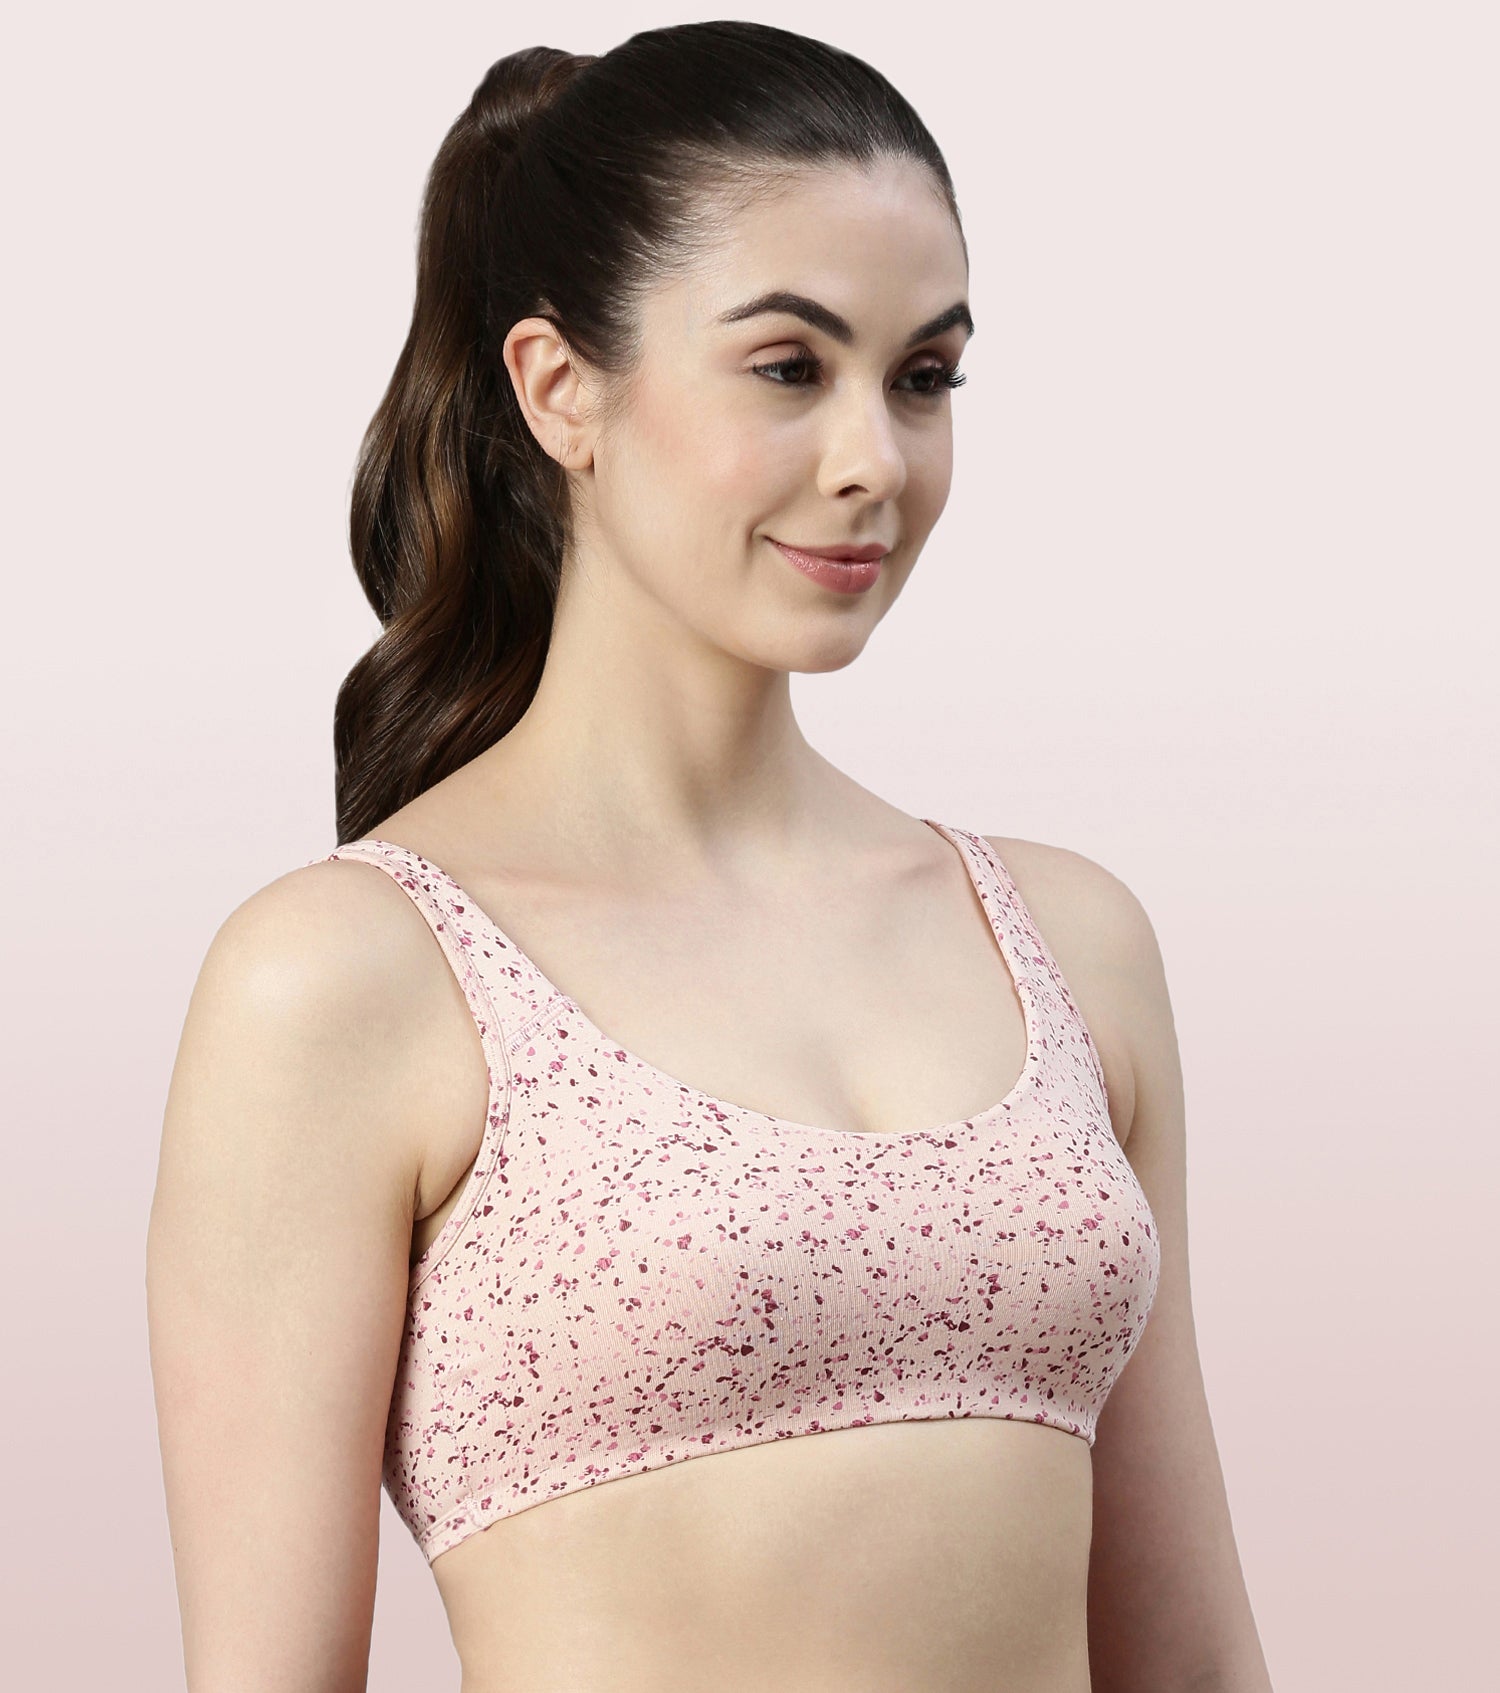 Enamor Women's Non Padded Wirefree Full Support Smooth Super Lift Full  Coverage Bra – Online Shopping site in India